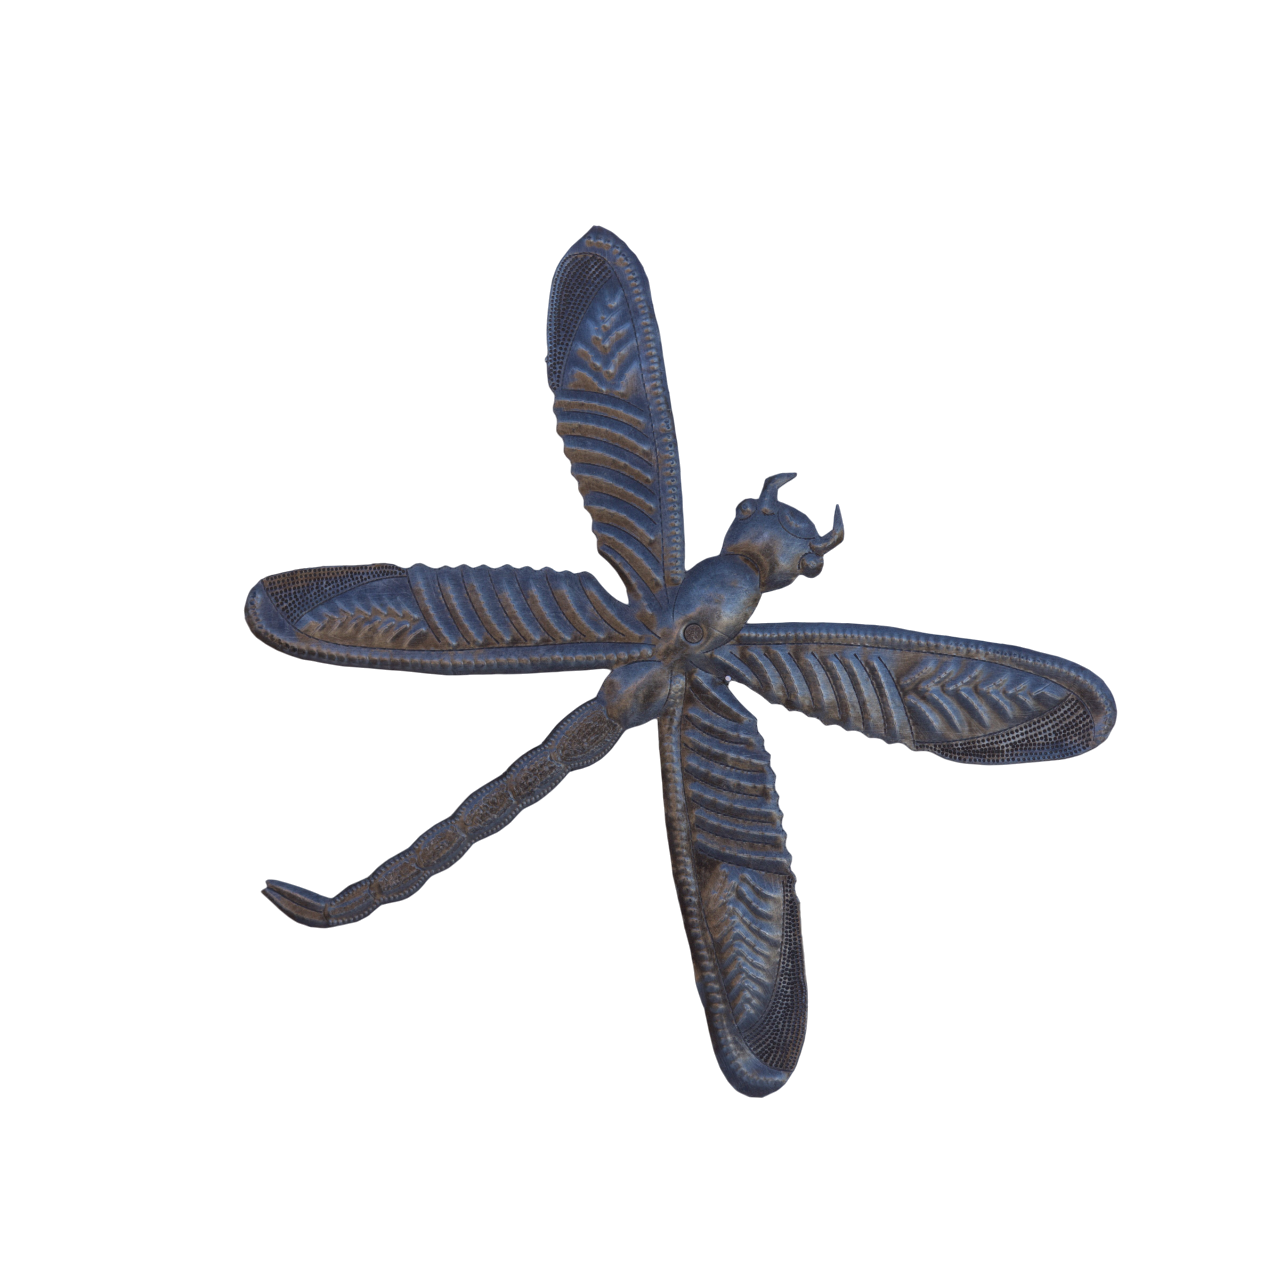 Dragonfly, Metal Dragonfly, Garden Dragonfly, Dragonfly Wall Sculpture